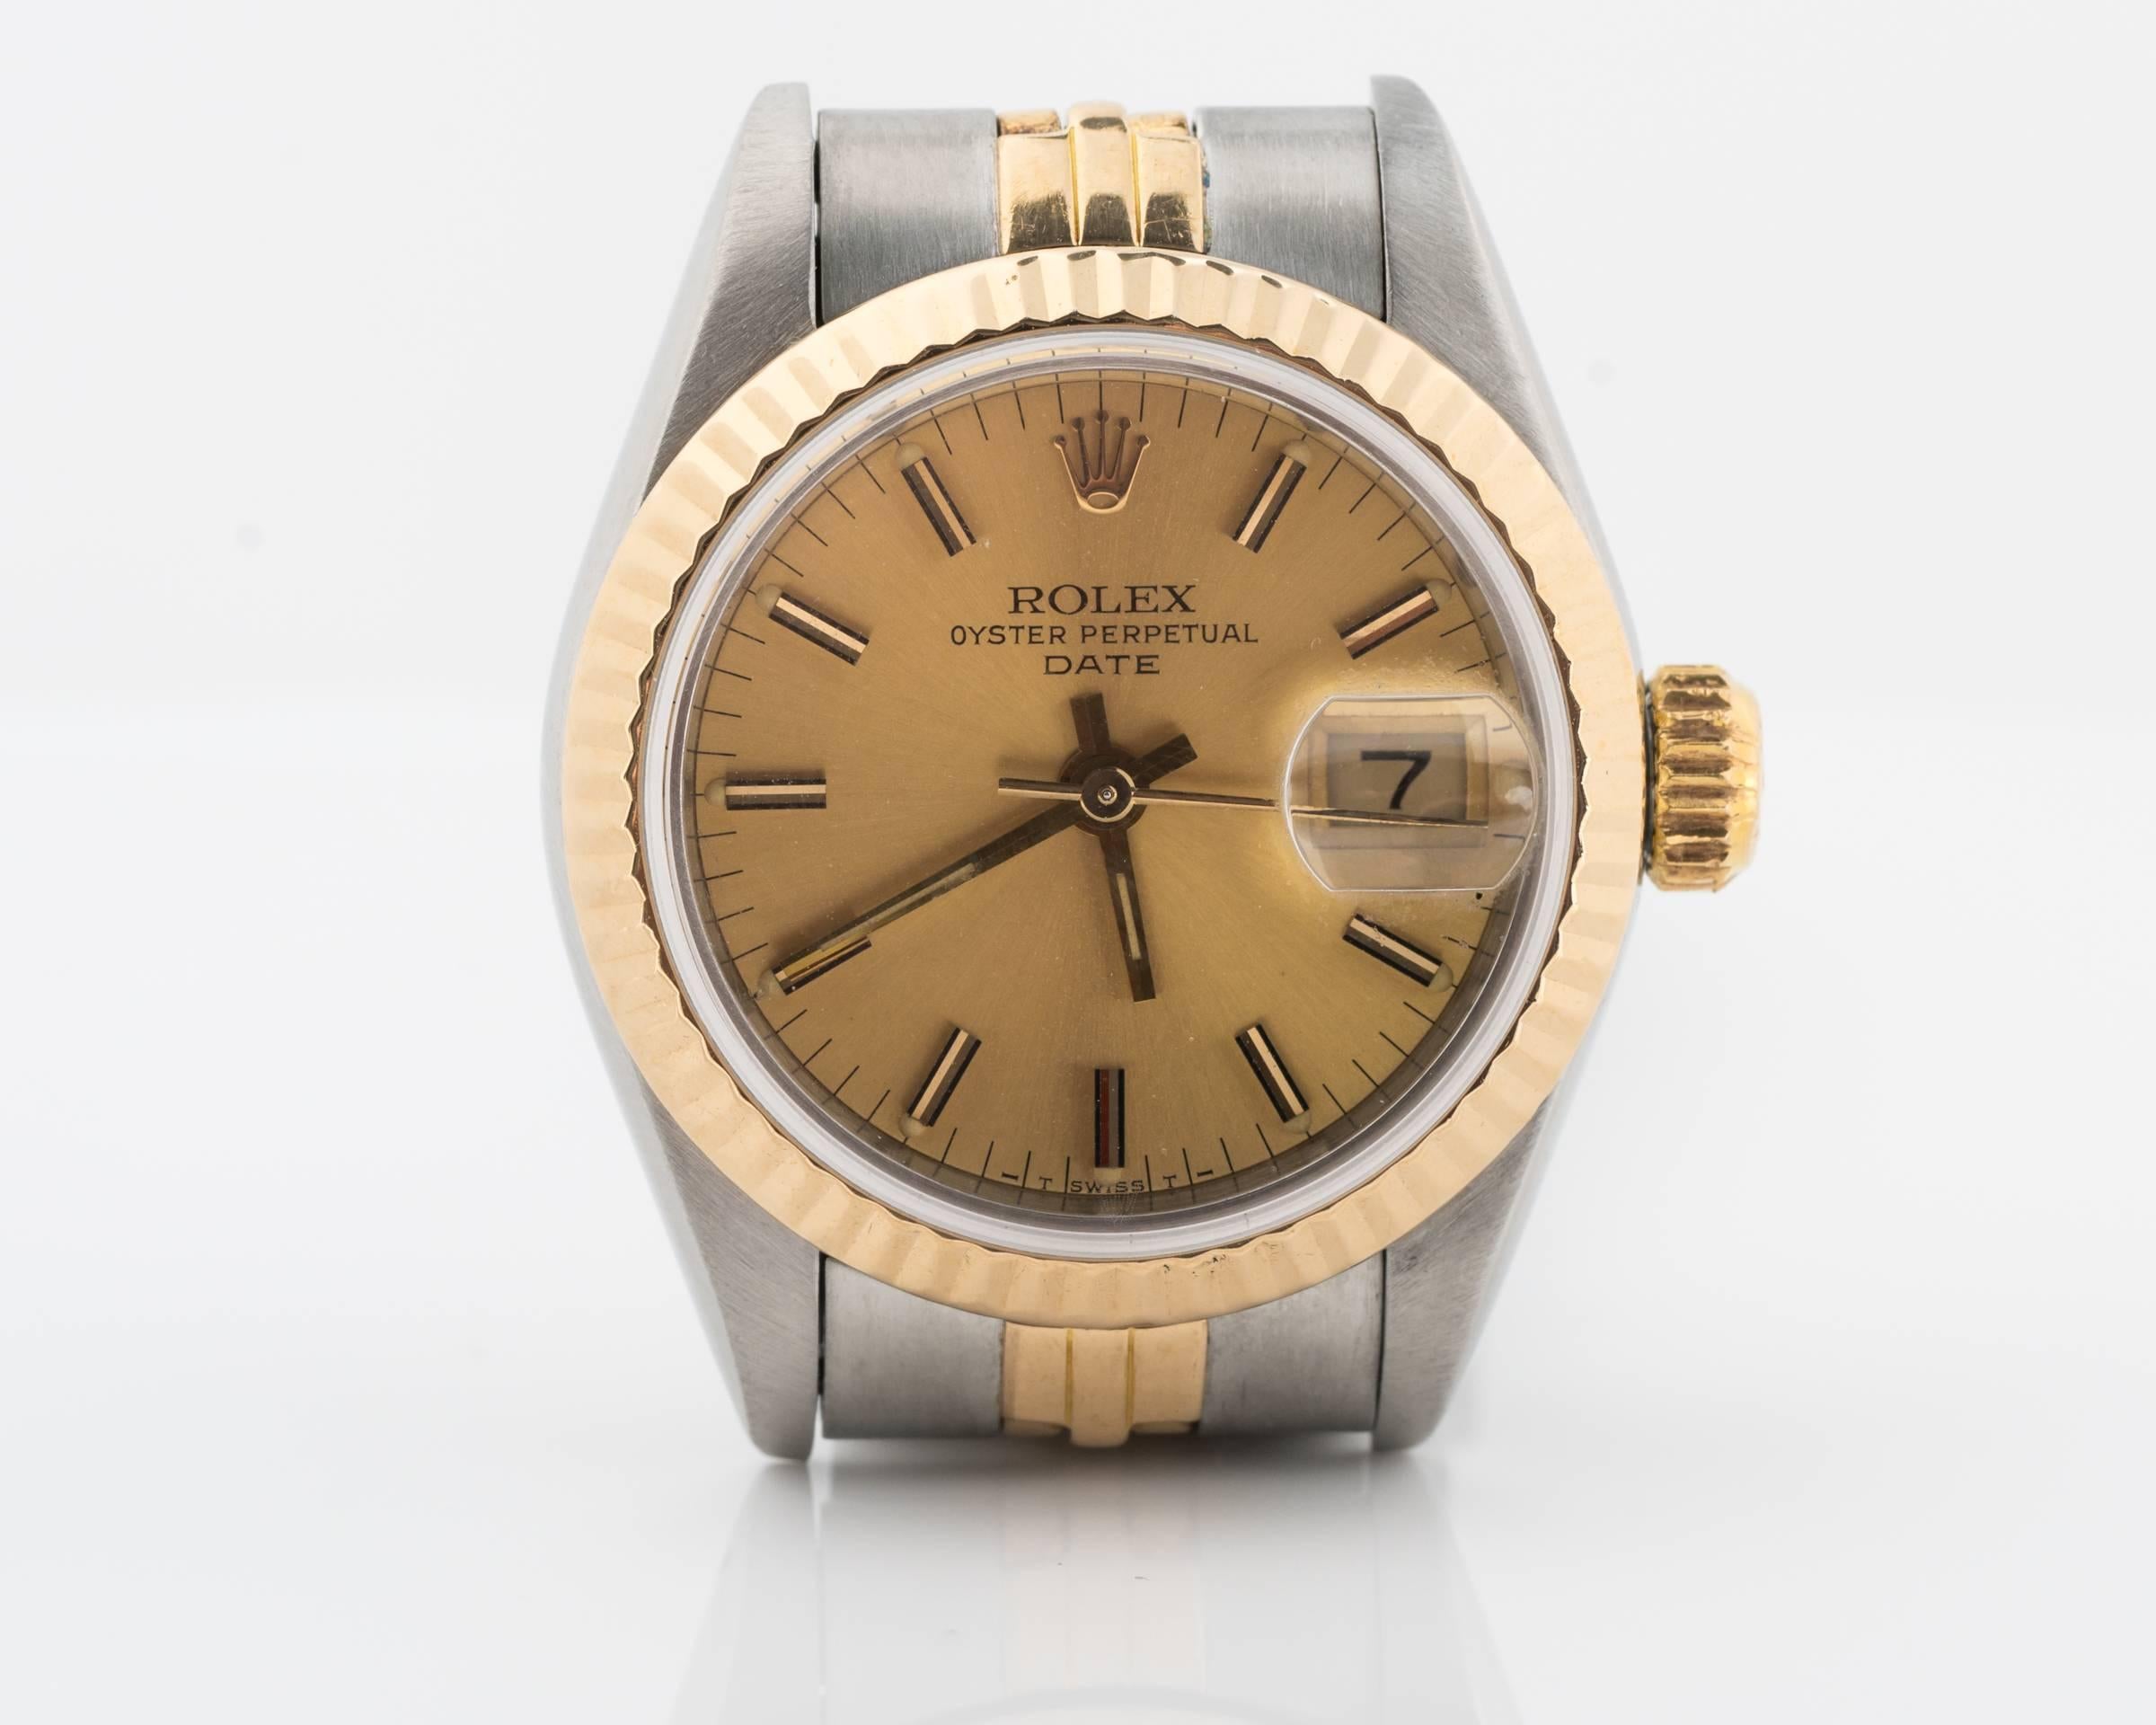 Vintage Ladies Rolex Date from 1984 
Two Tone - Stainless Steel and 18 Karat Gold with Jubilee Bracelet 
Champagne Stick Dial 
Sapphire Crystal  
Fits up to 7 inches 
26mm Case 
Reference # 69173, Accompanied with a Rolex box